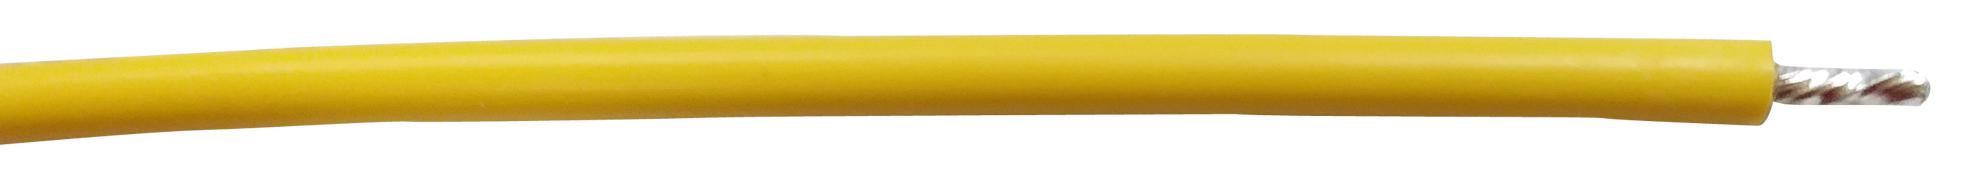 PP002416 HOOK-UP WIRE, 30AWG, YELLOW, 305M, 300V PRO POWER